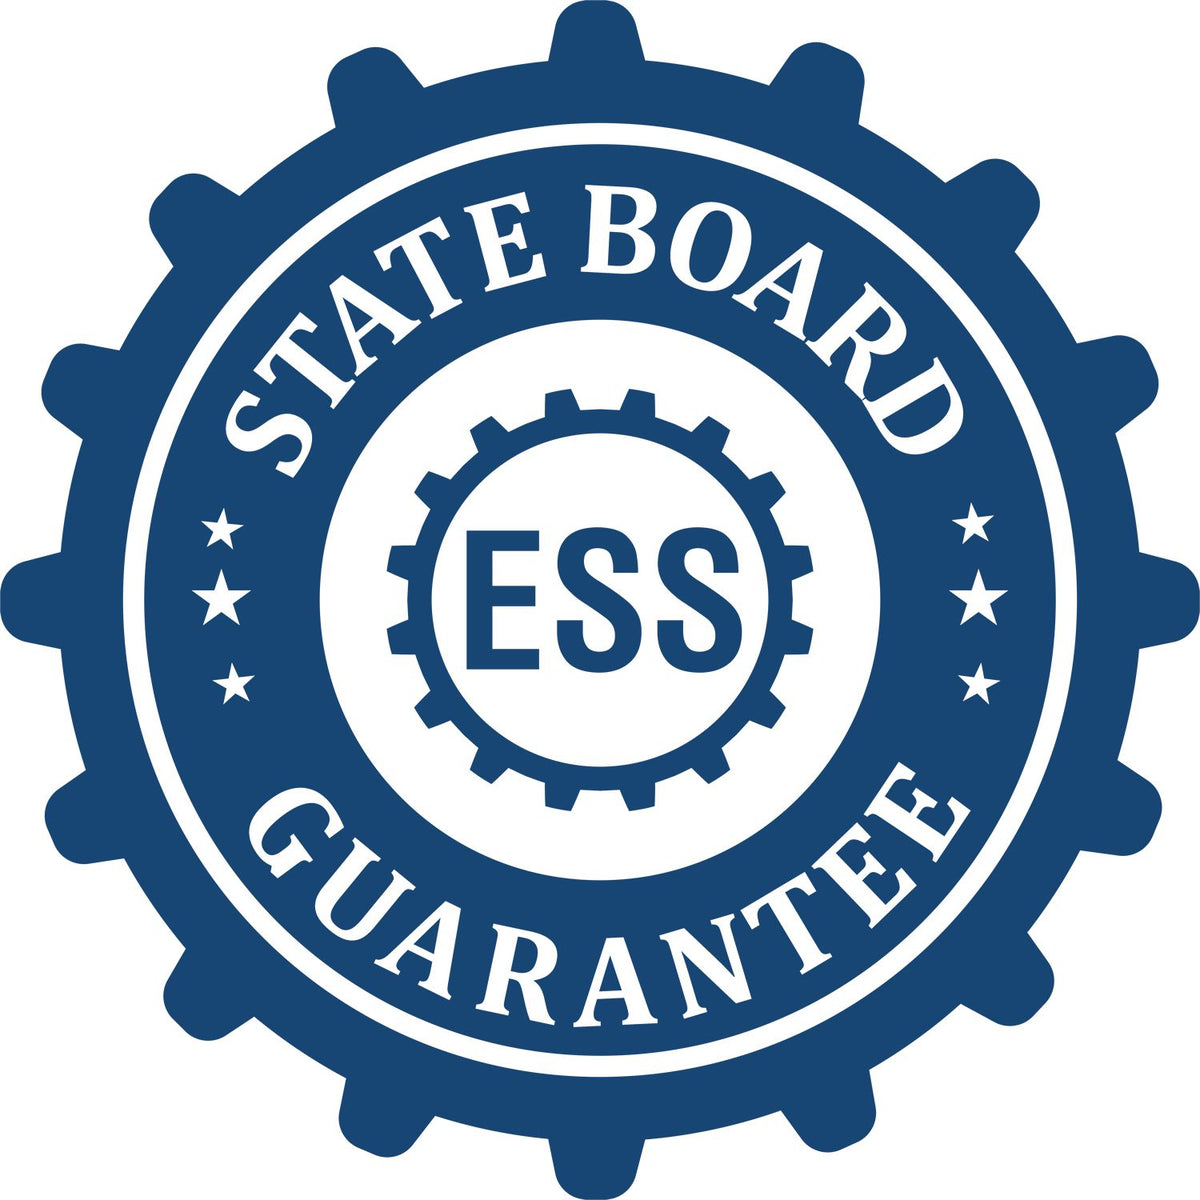 An emblem in a gear shape illustrating a state board guarantee for the Illinois Landscape Architectural Seal Stamp product.